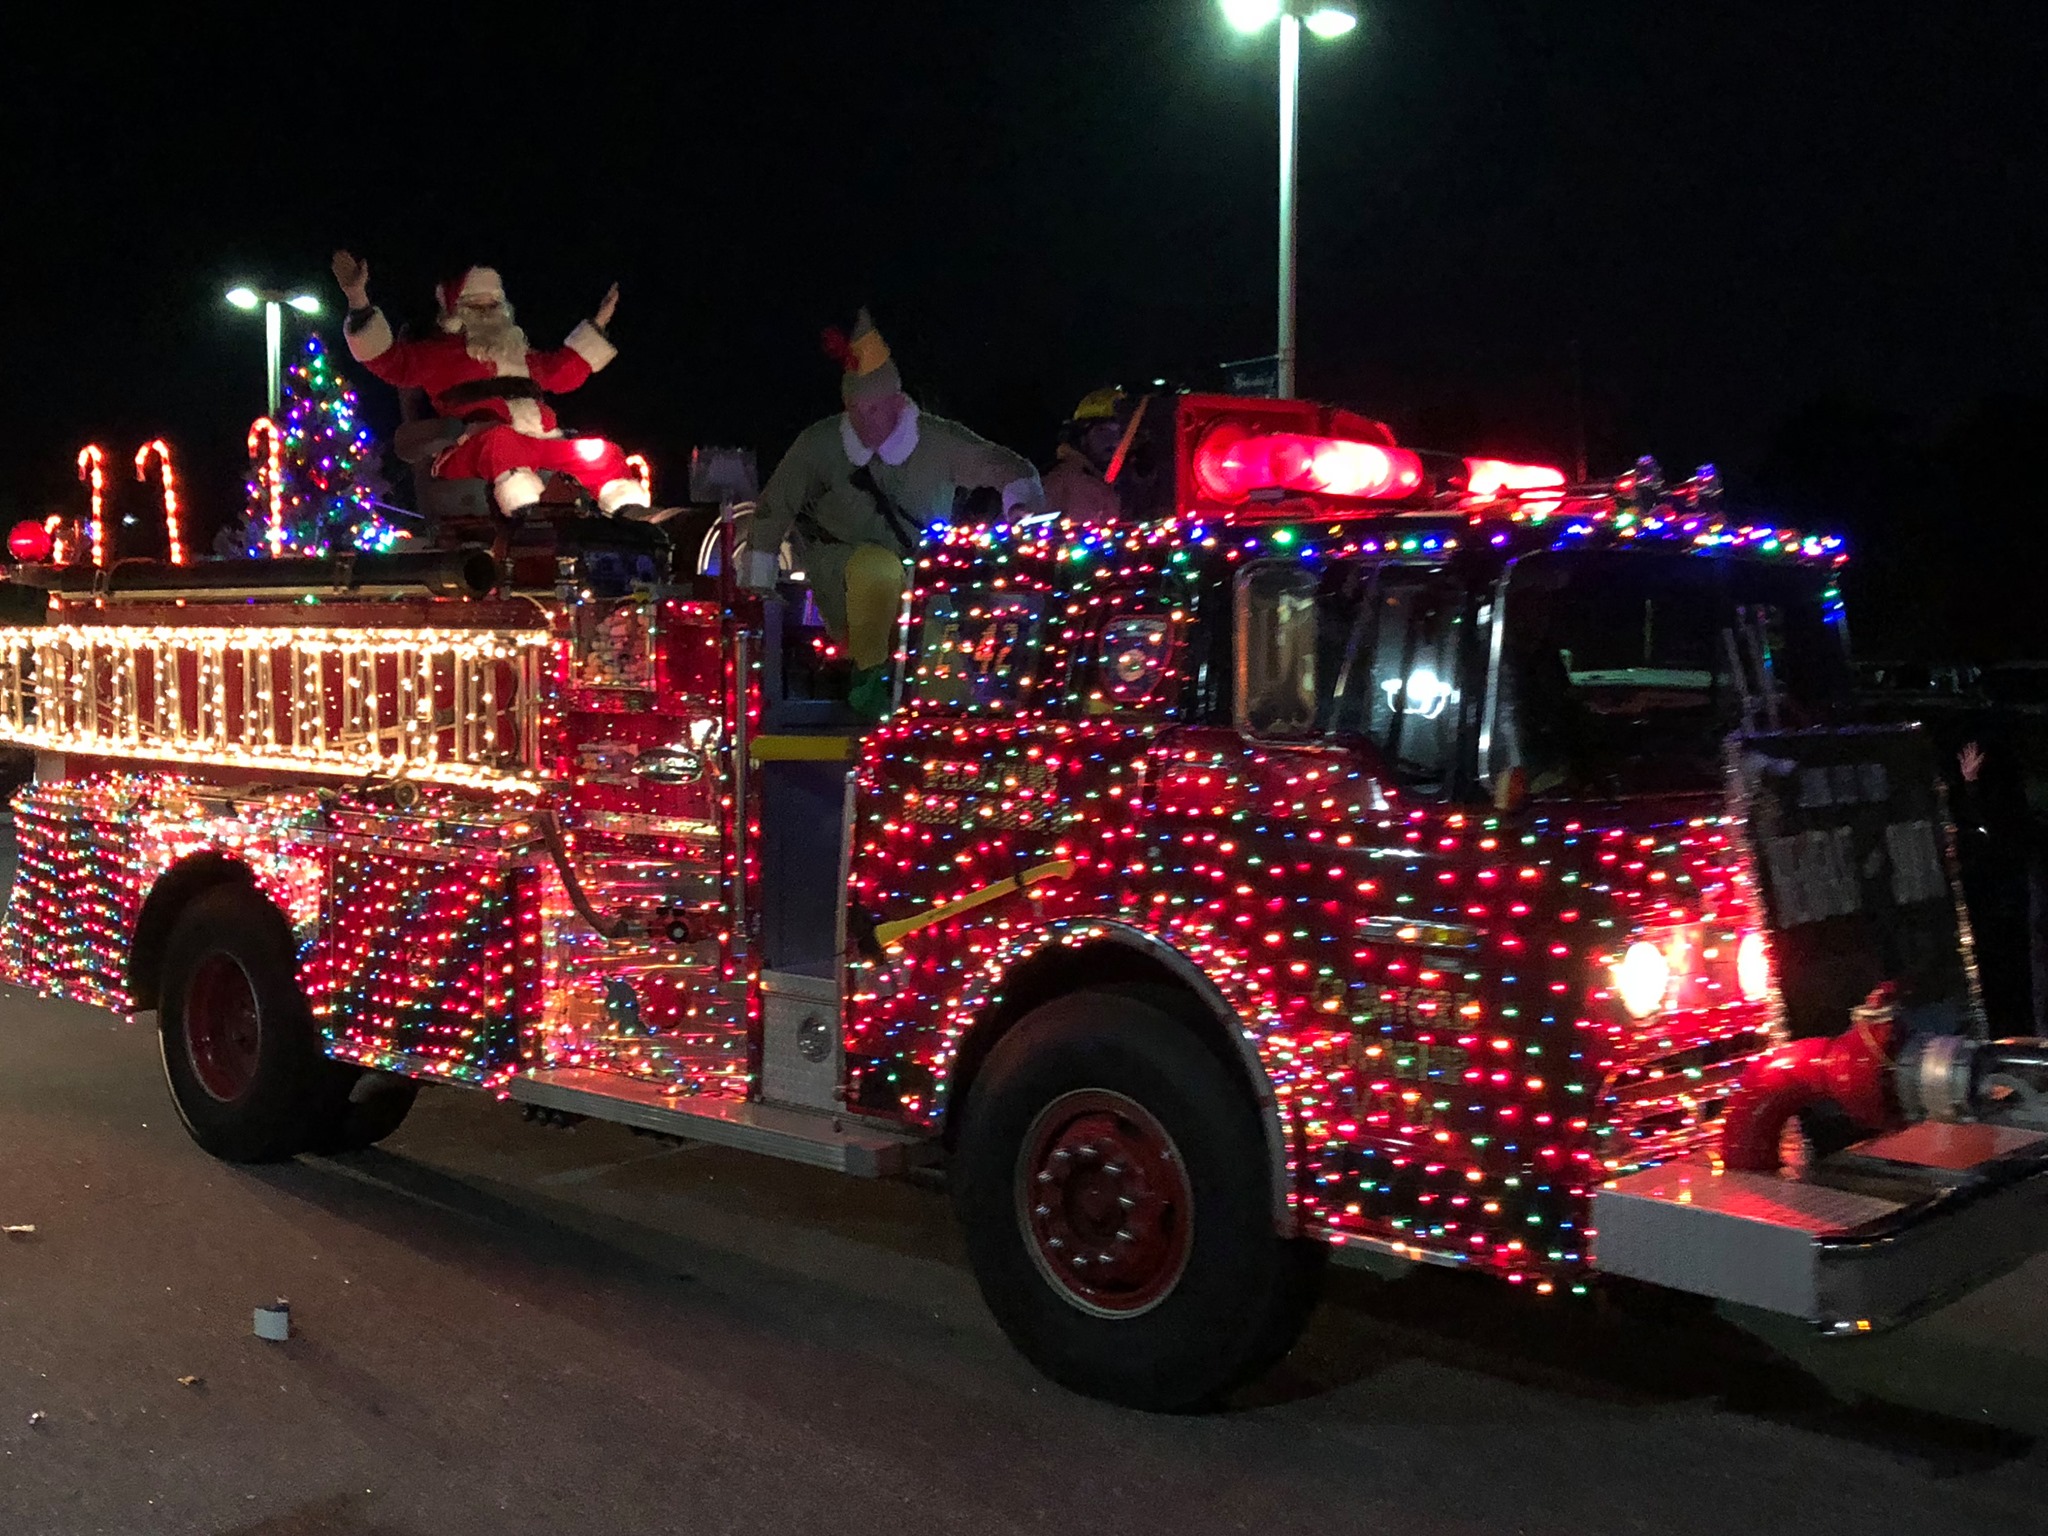 Currituck Christmas parade and tree lighting set for December 2